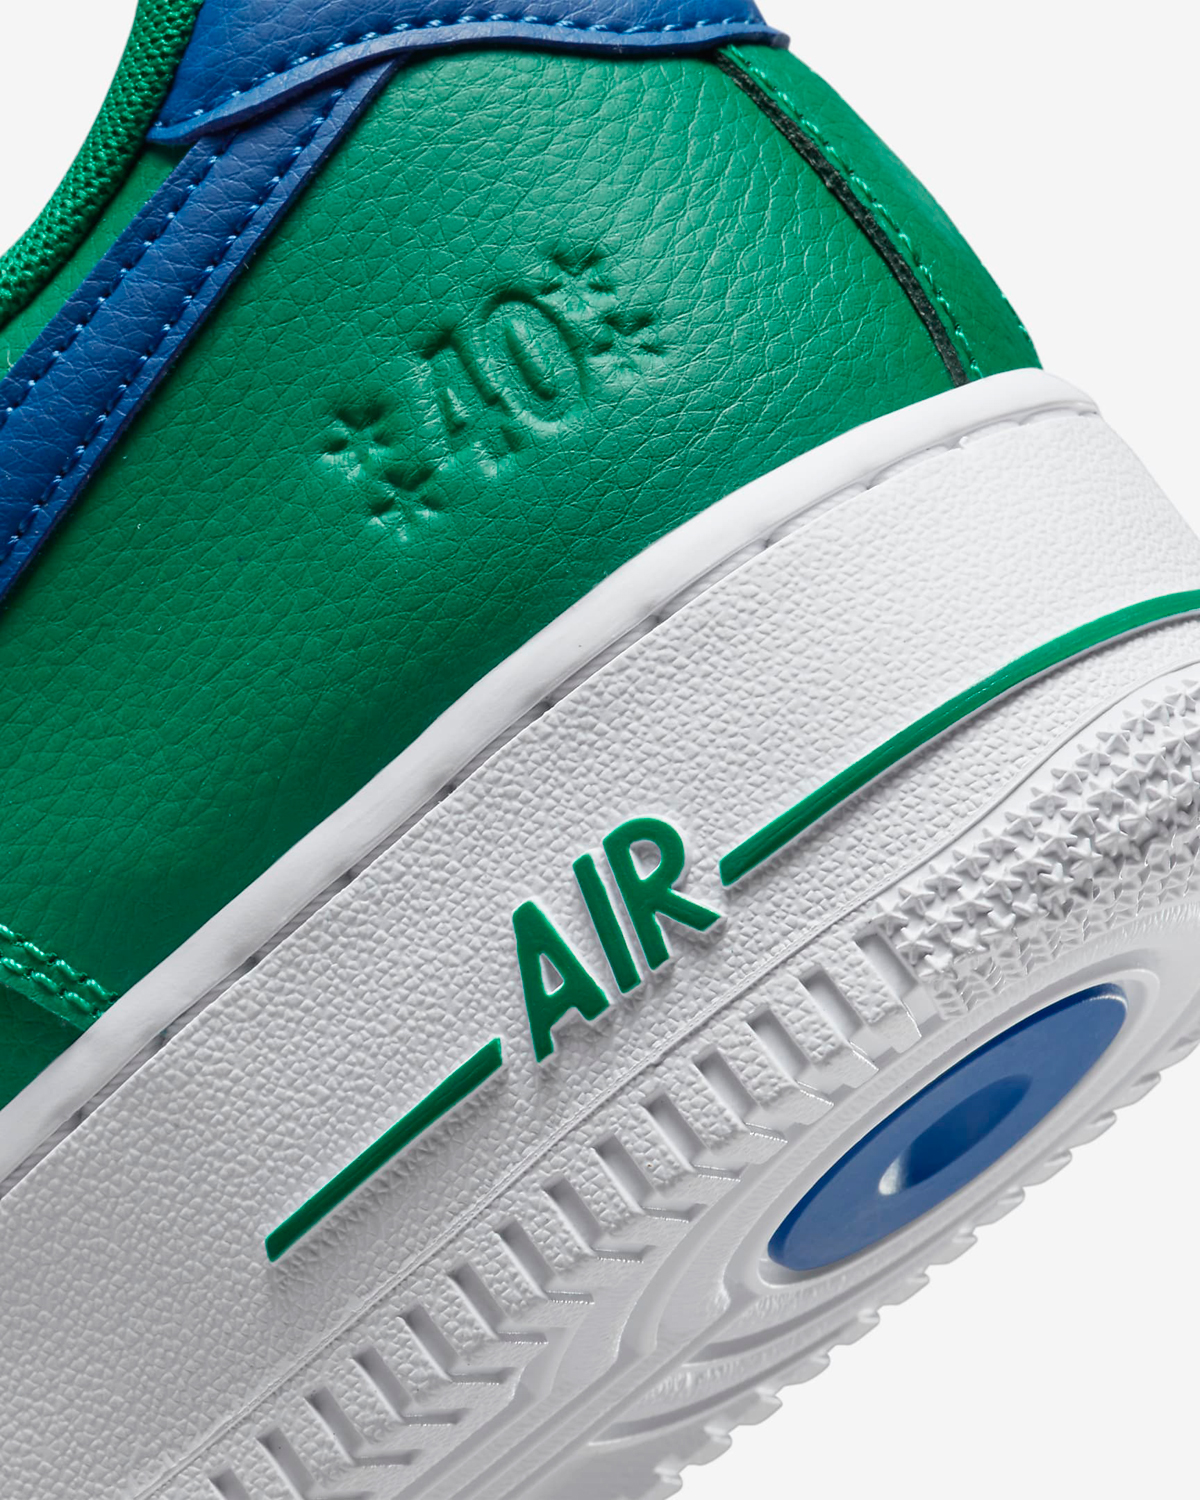 Nike-Air-Force-1-Low-40th-Anniversary-Malachite-Sail-Blue-Jay-Release-Date-8